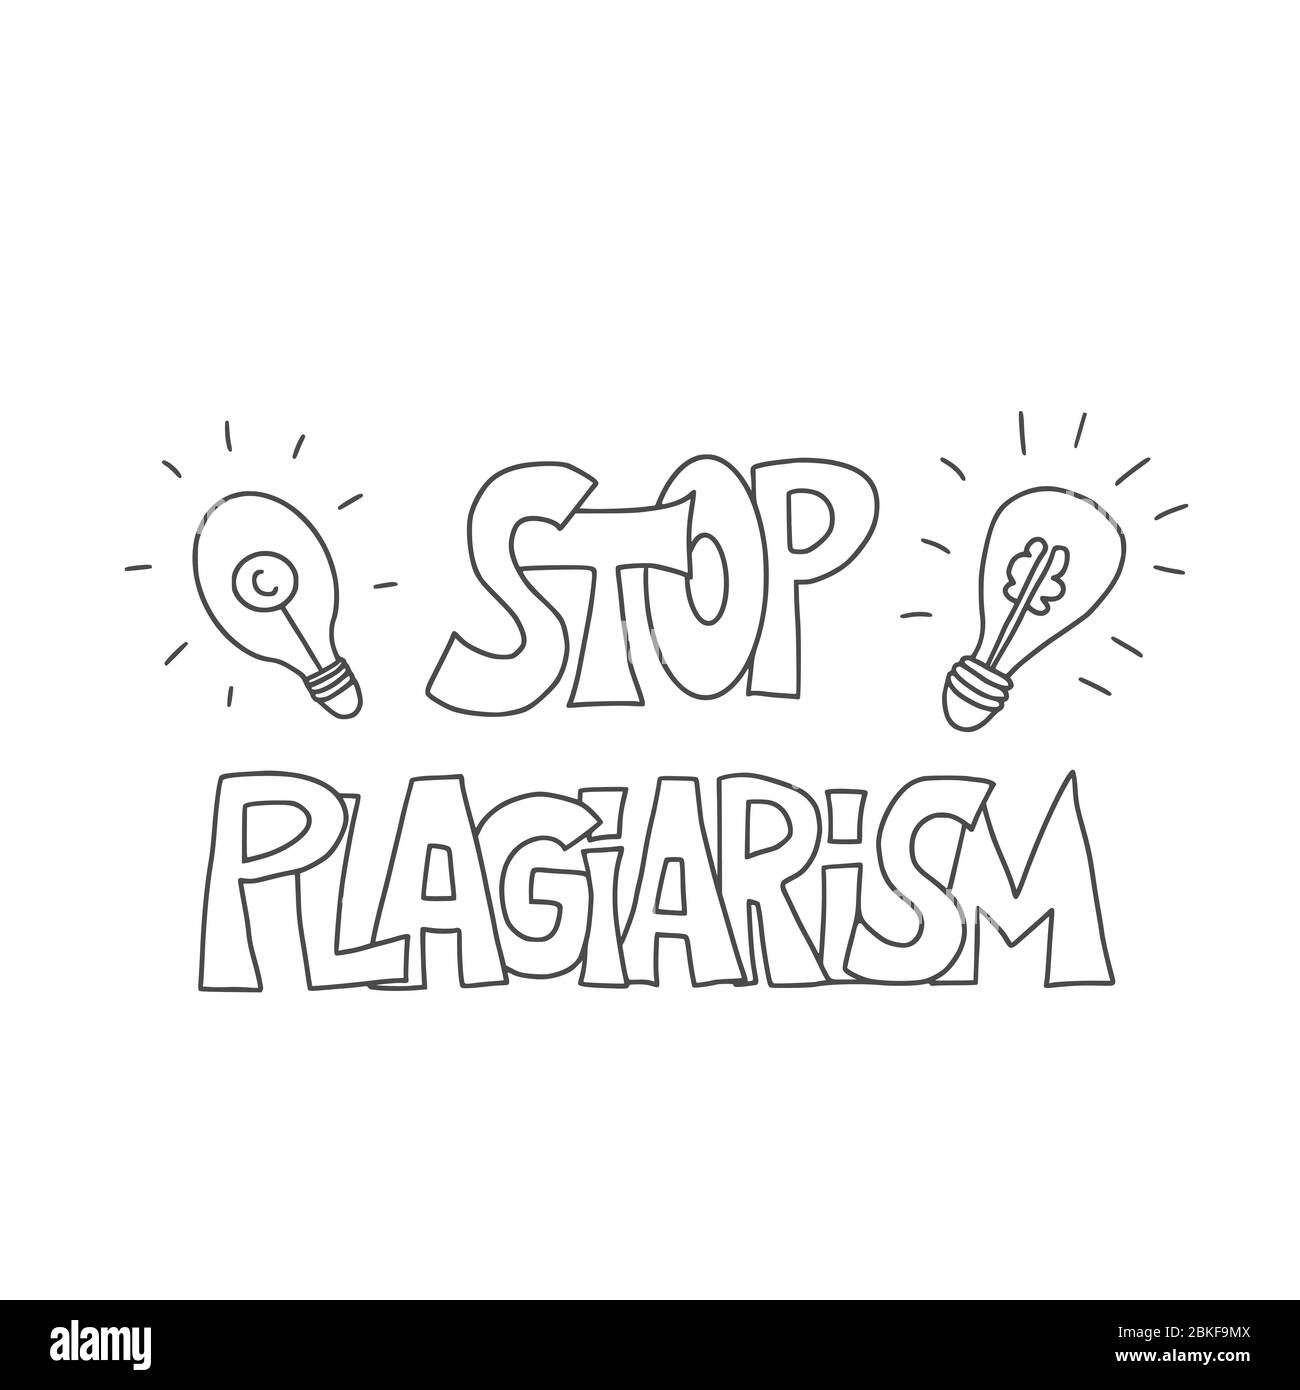 Stop plagiarism hand drawn text. Intellectual property lettering. Vector illustration. Stock Vector